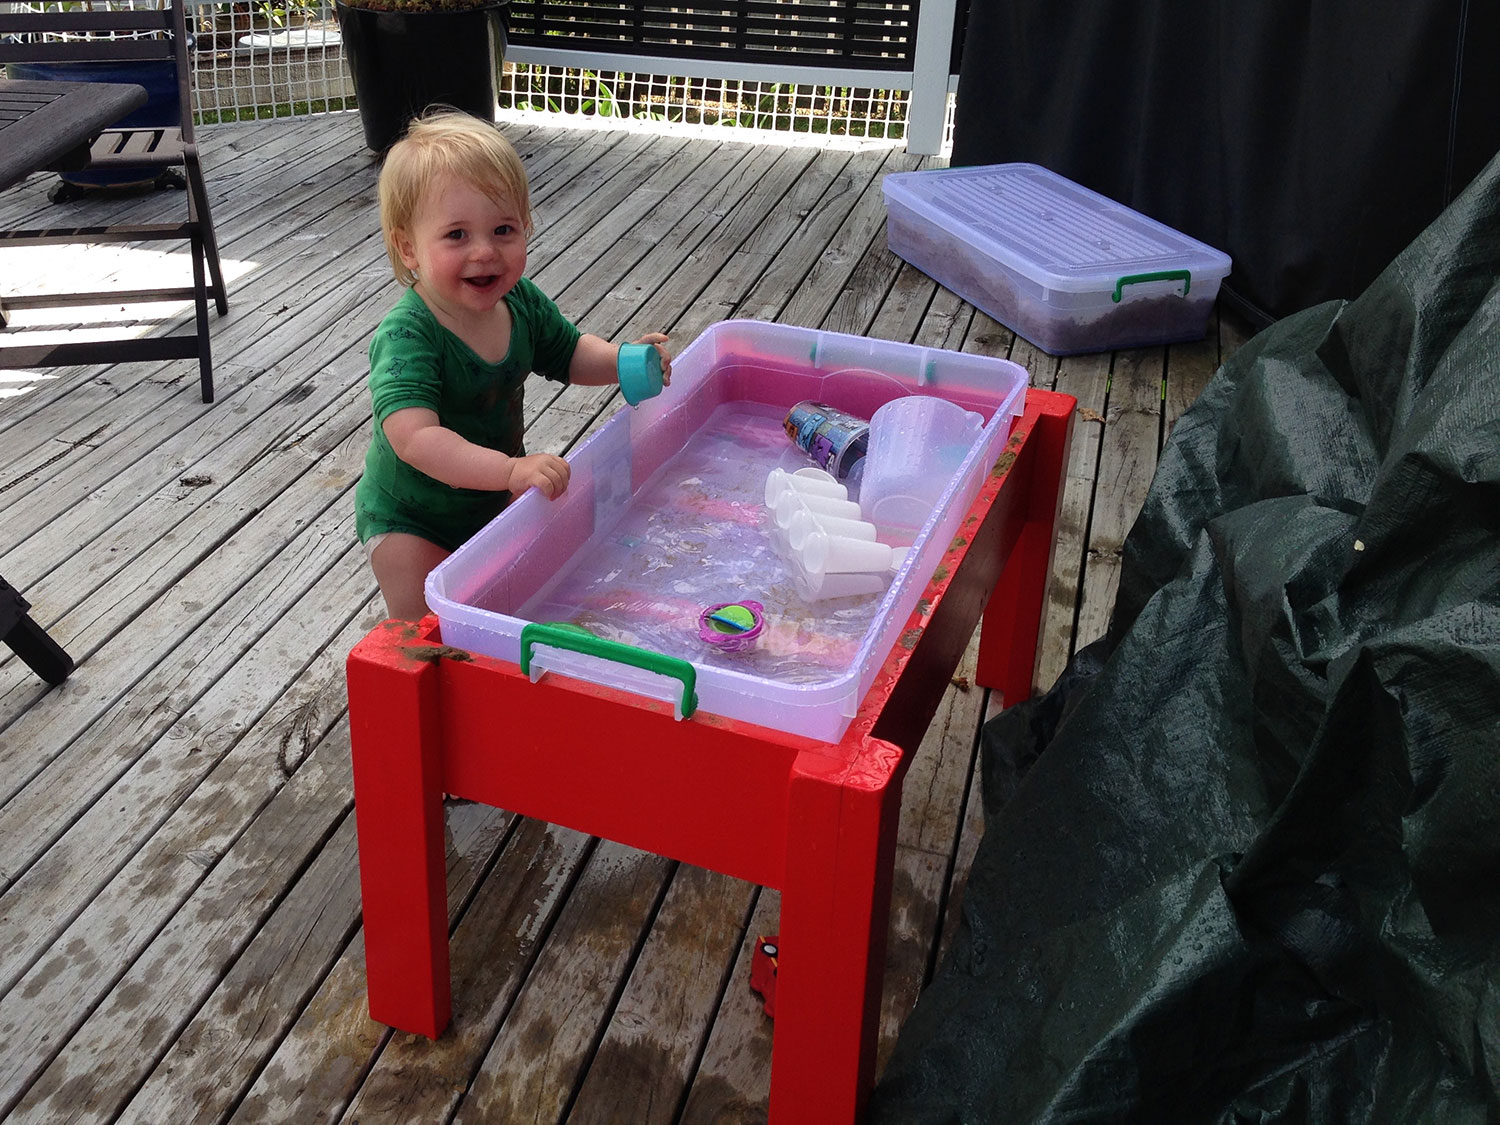 Water table